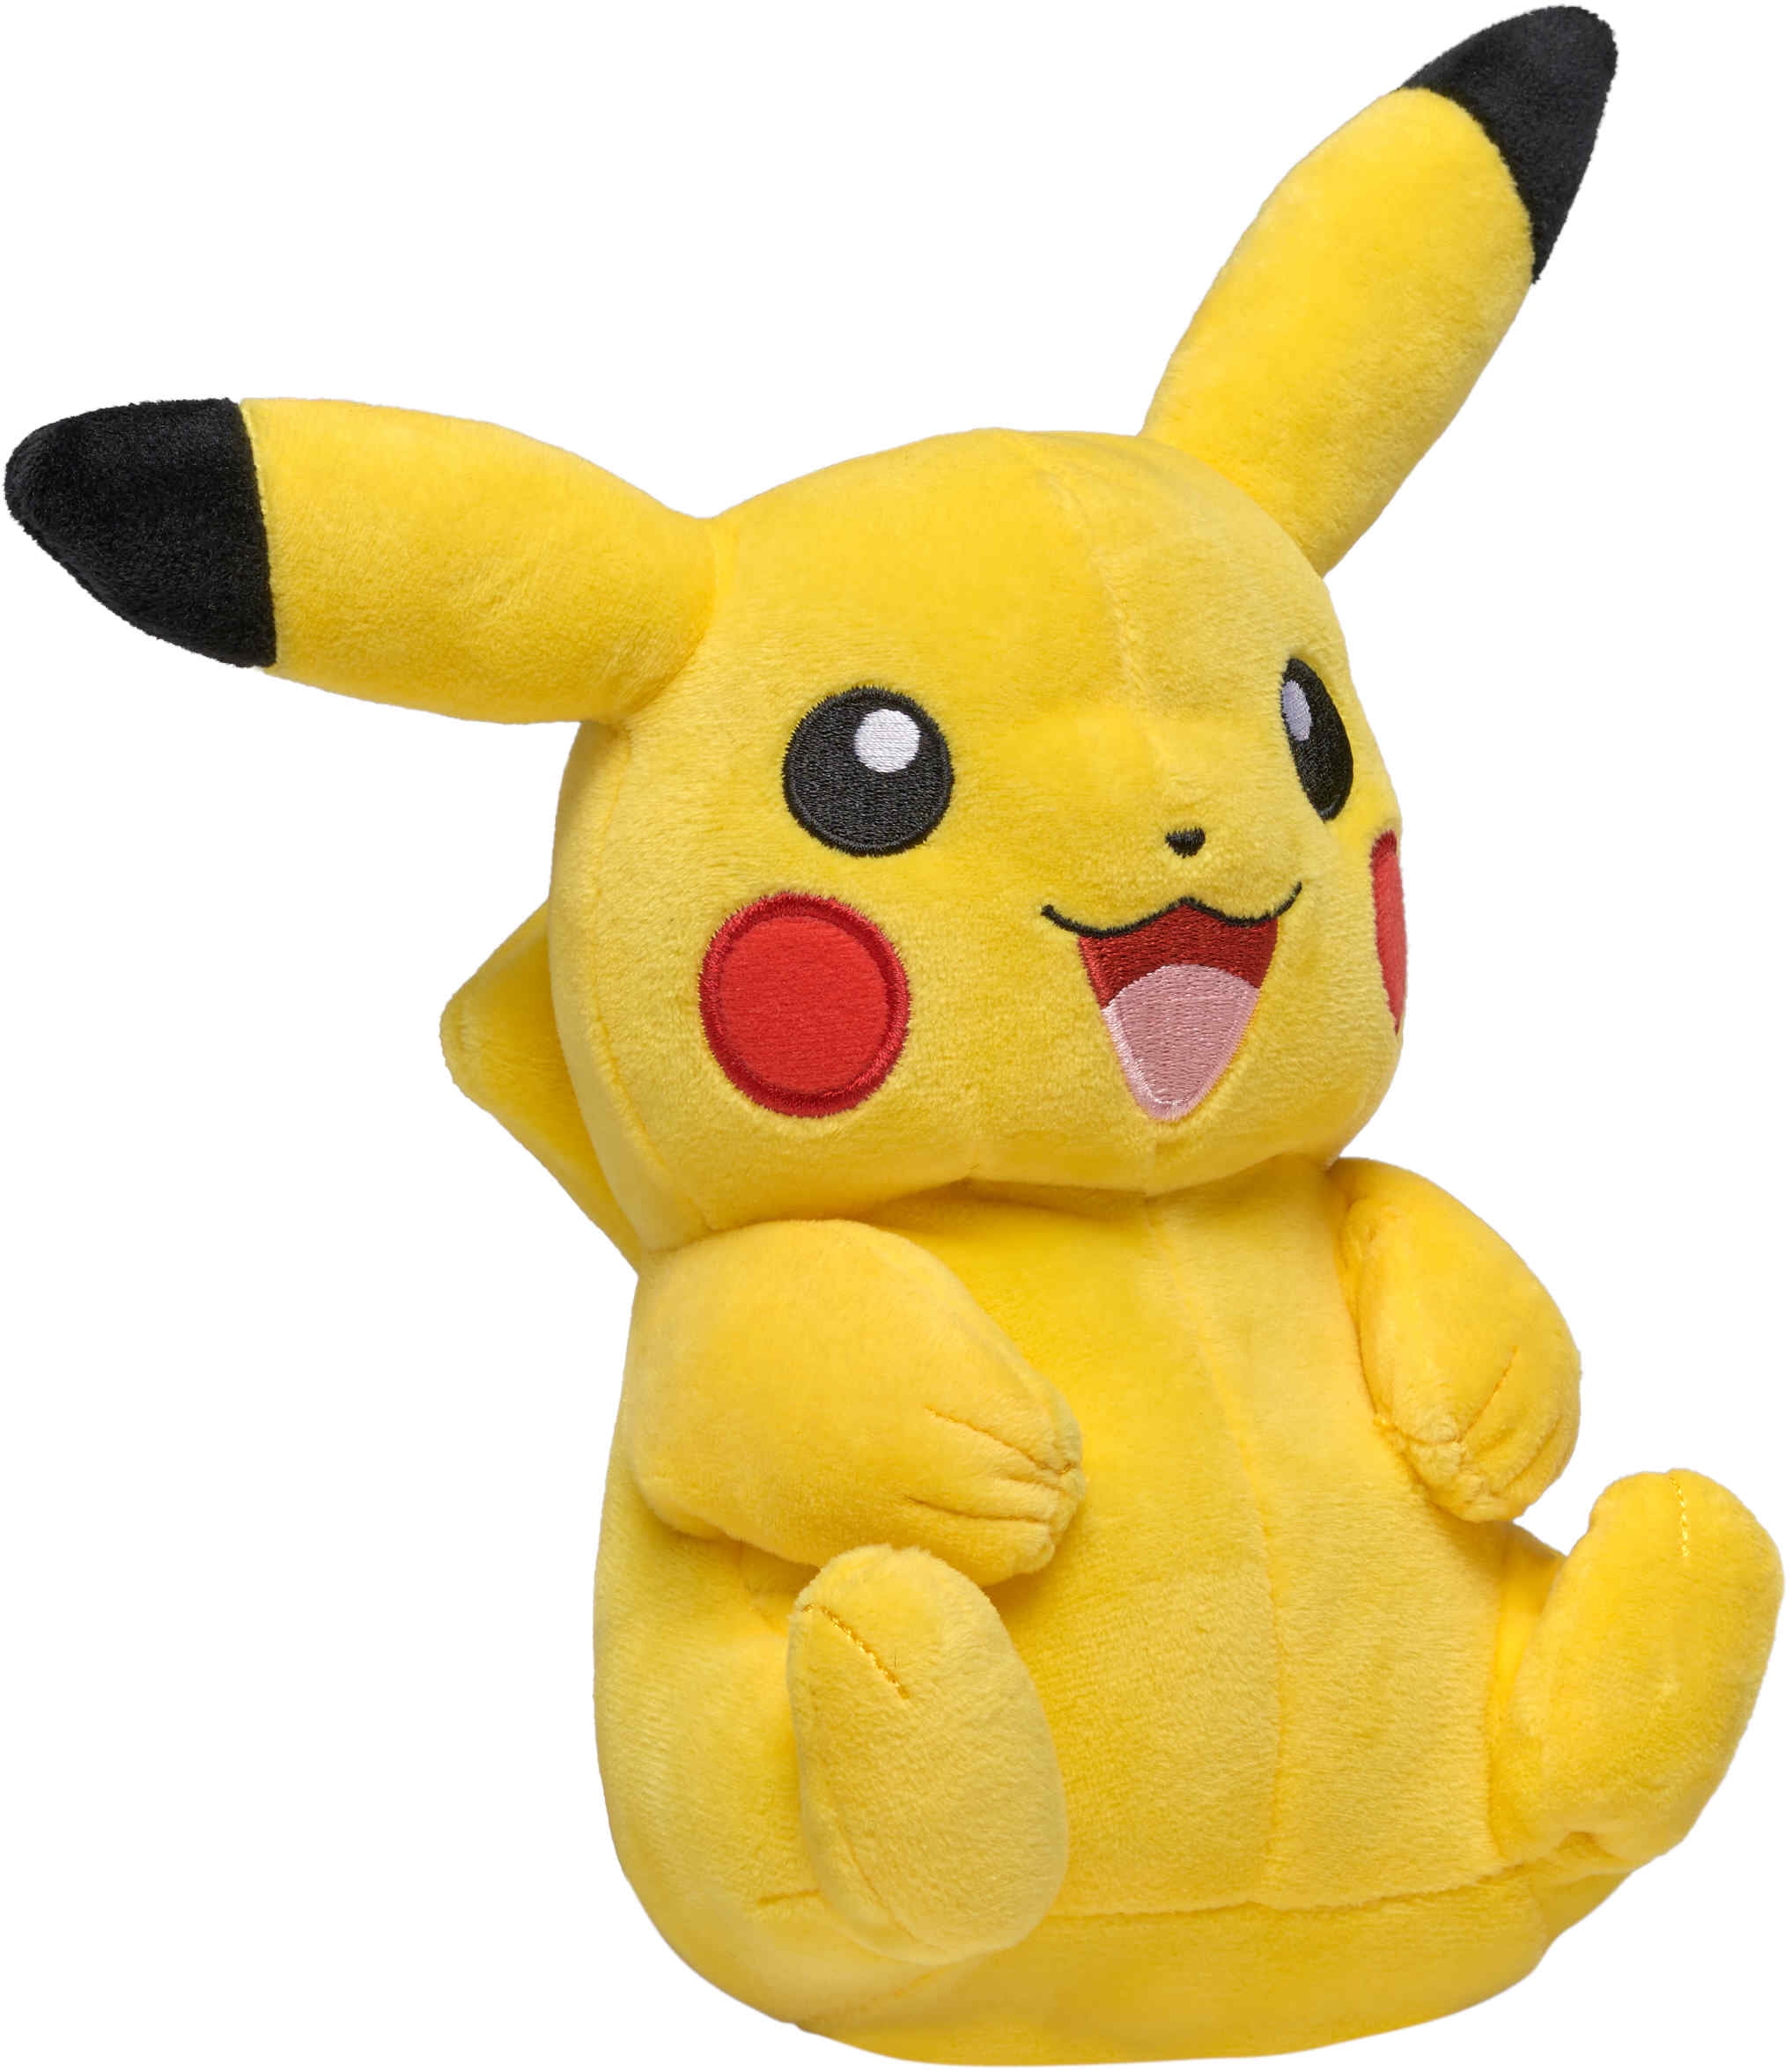  Pokémon 8 Pikachu Plush - Officially Licensed - Quality & Soft Stuffed  Animal Toy - Generation One - Great Gift for Kids, Boys, Girls & Fans of  Pokemon - 8 Inches : Toys & Games